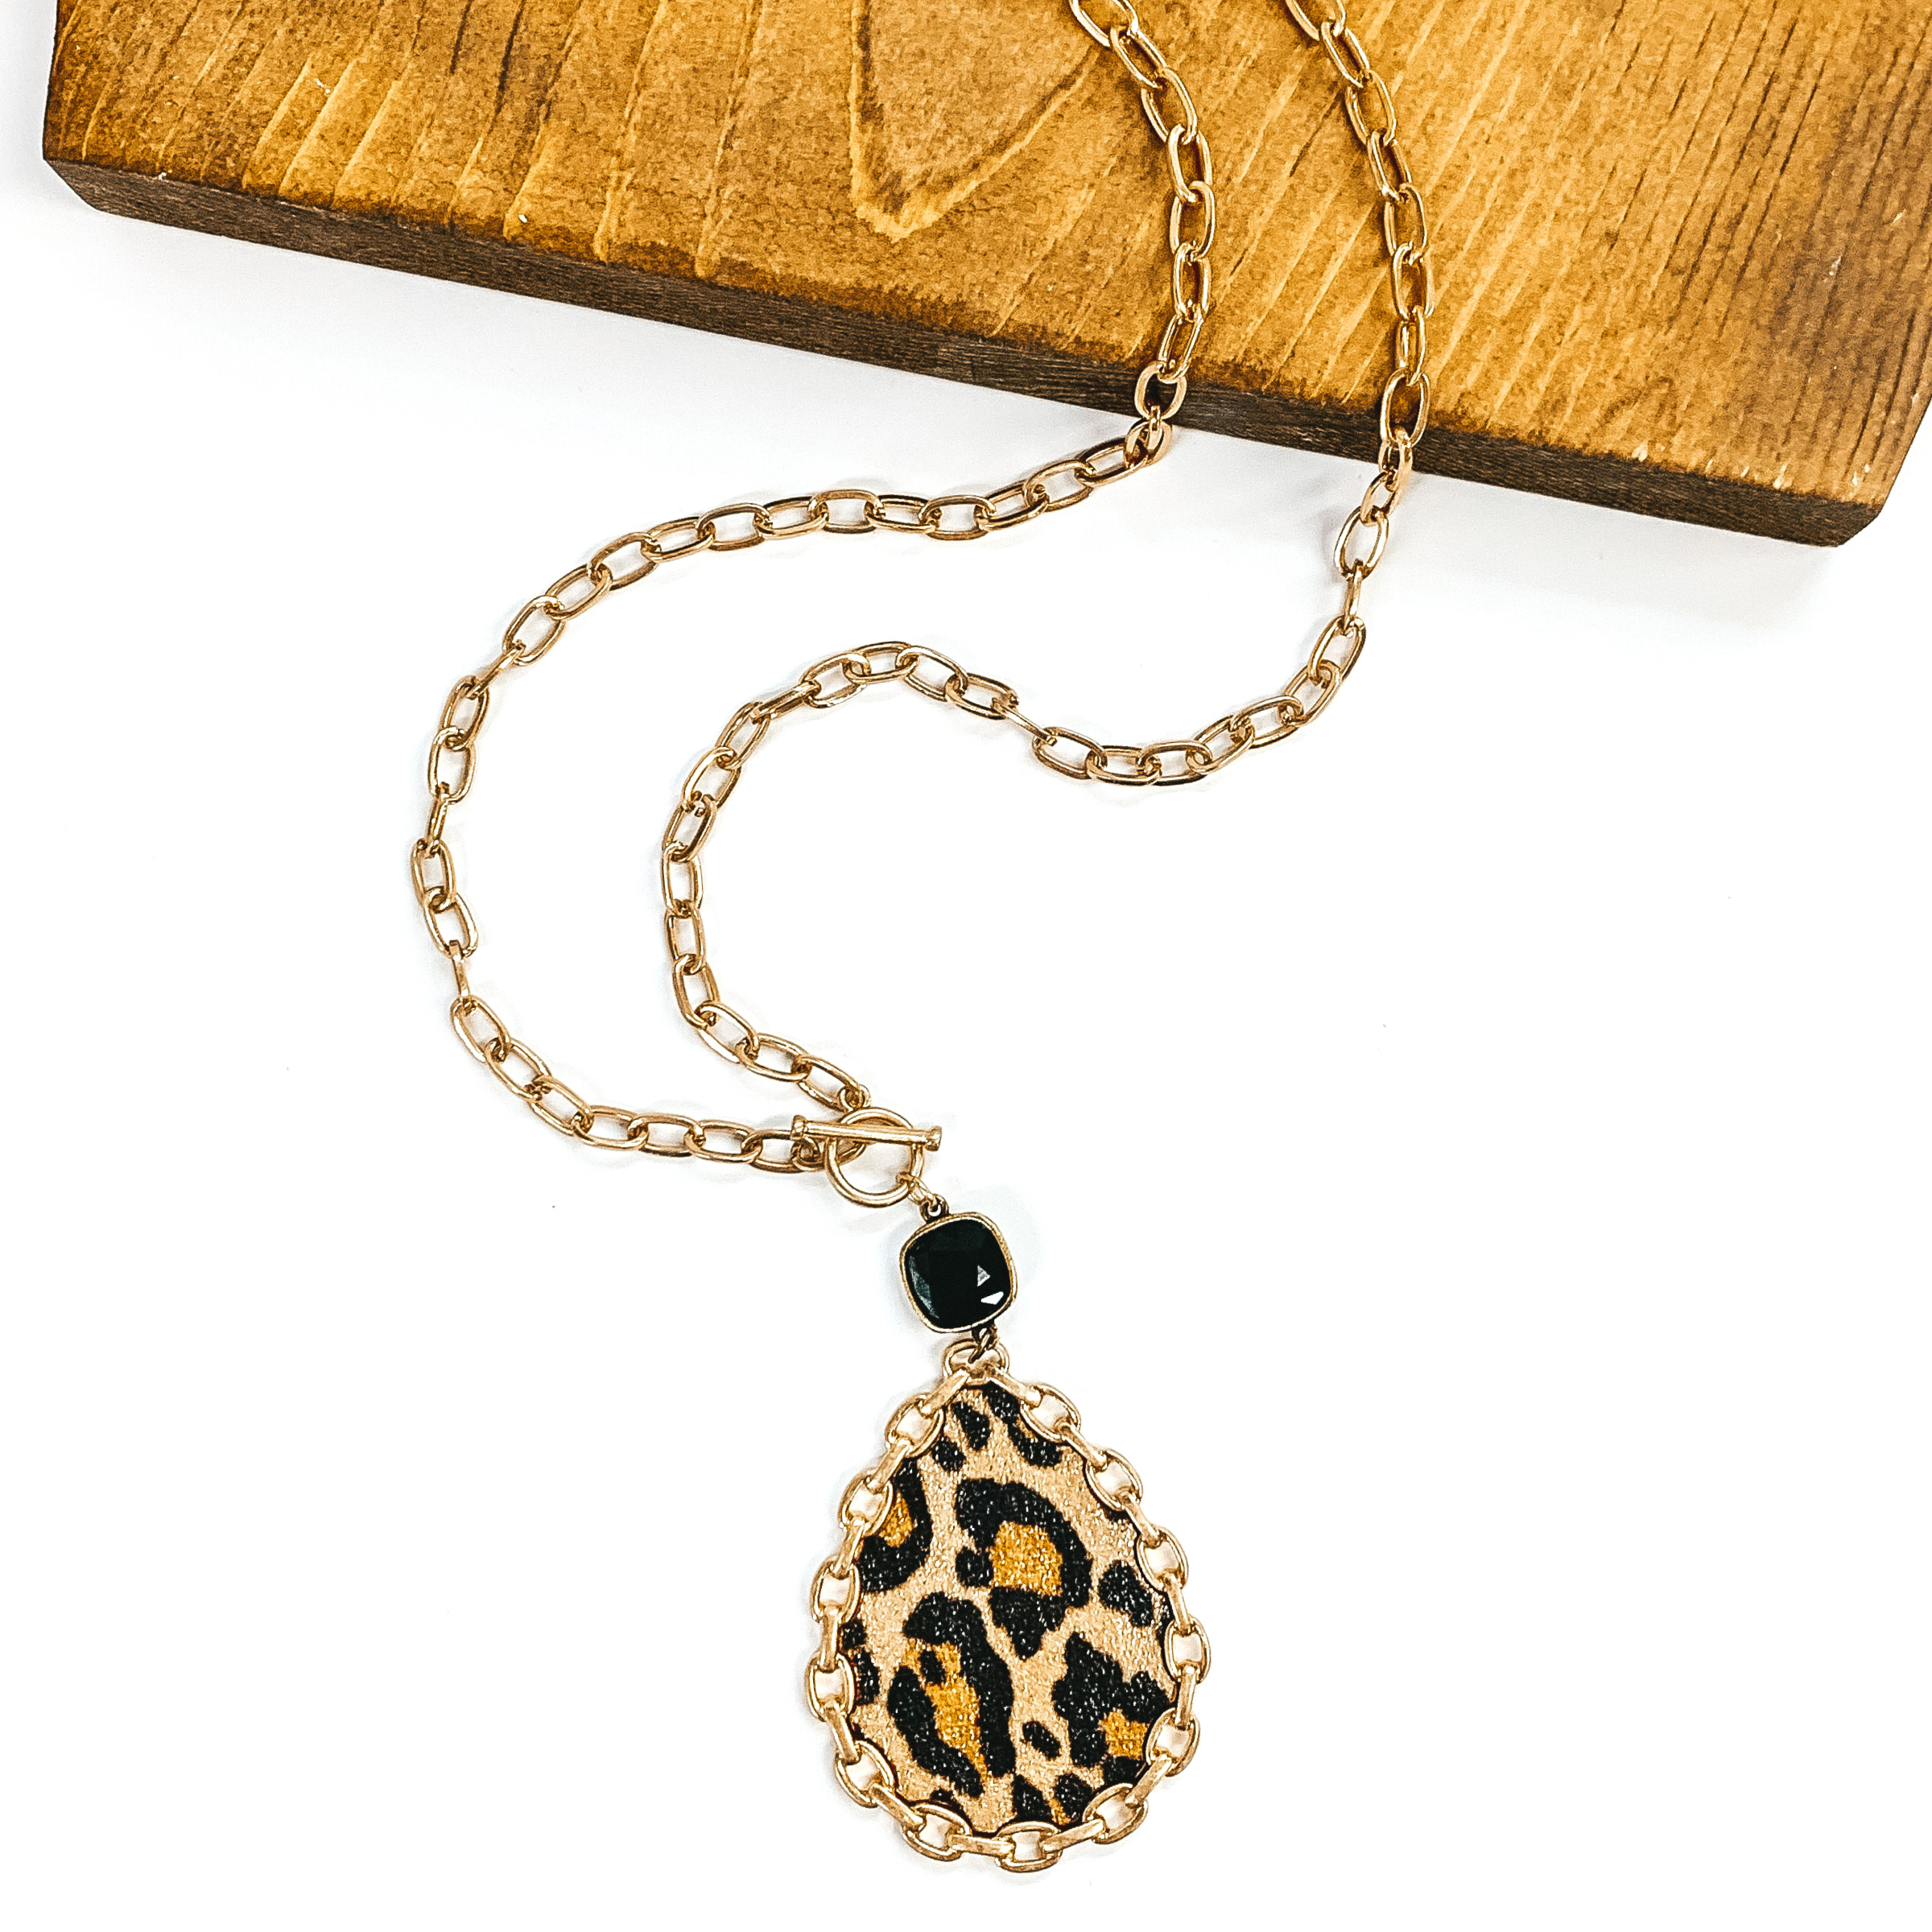 Gold chained necklace with front toggle clasp. This necklace includes a hanging black cushion cut crystal with a bronze back, hanging from the toggle clasp. Hanging from the crystal was a teardrop pendant in leopard print with a gold chained outline. This necklace is pictured partially on a piece of dark wood and on a white background.